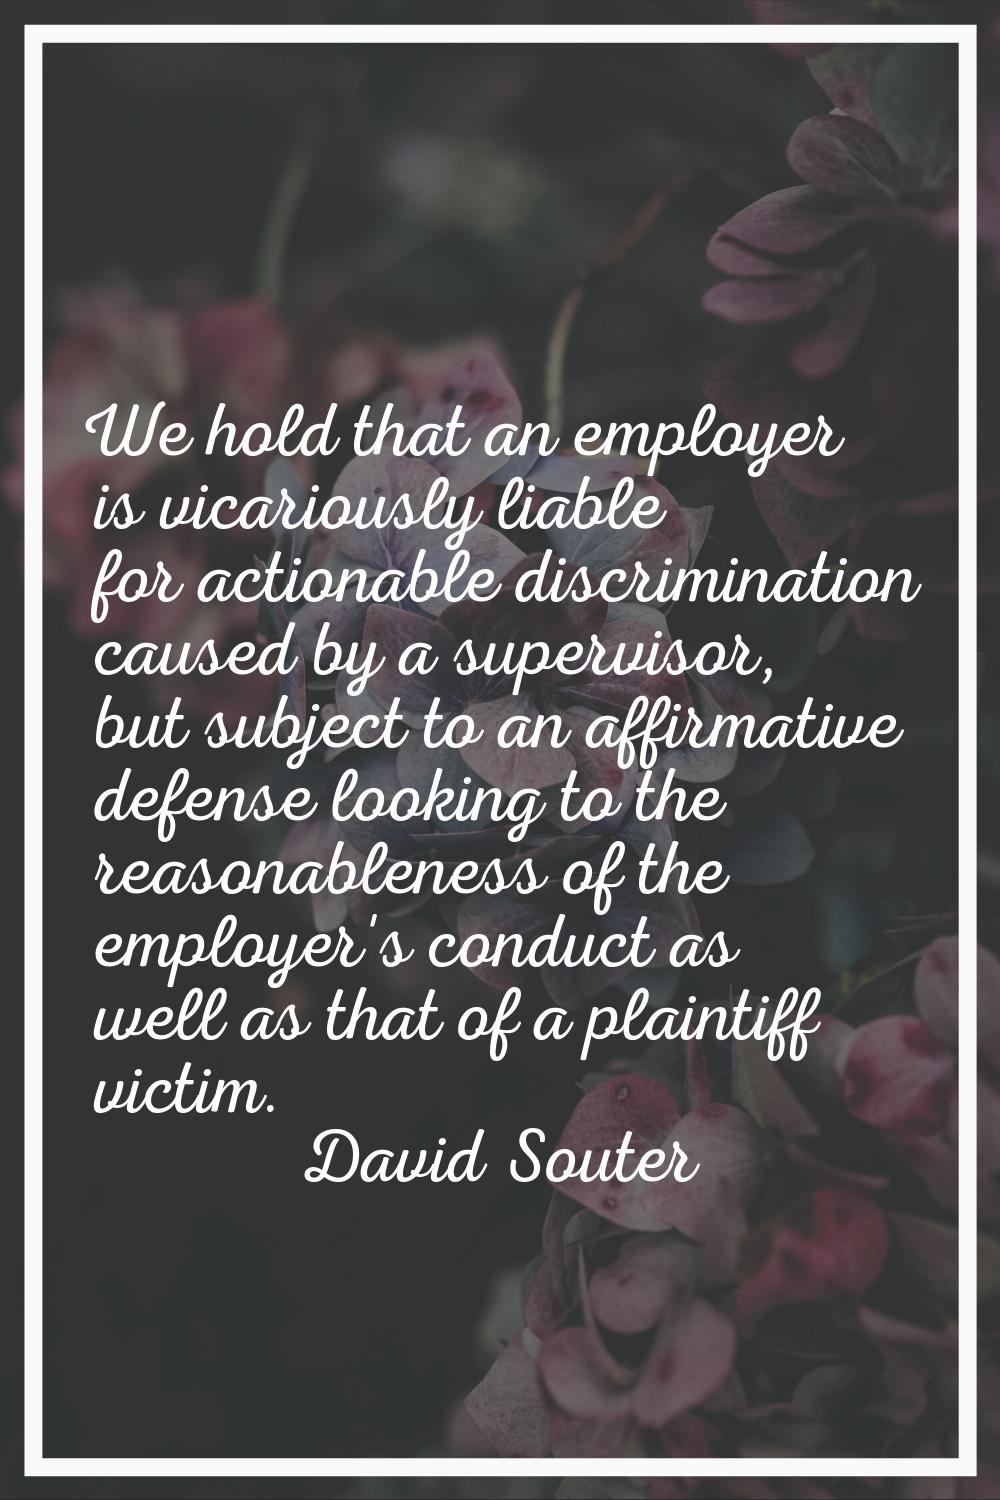 We hold that an employer is vicariously liable for actionable discrimination caused by a supervisor